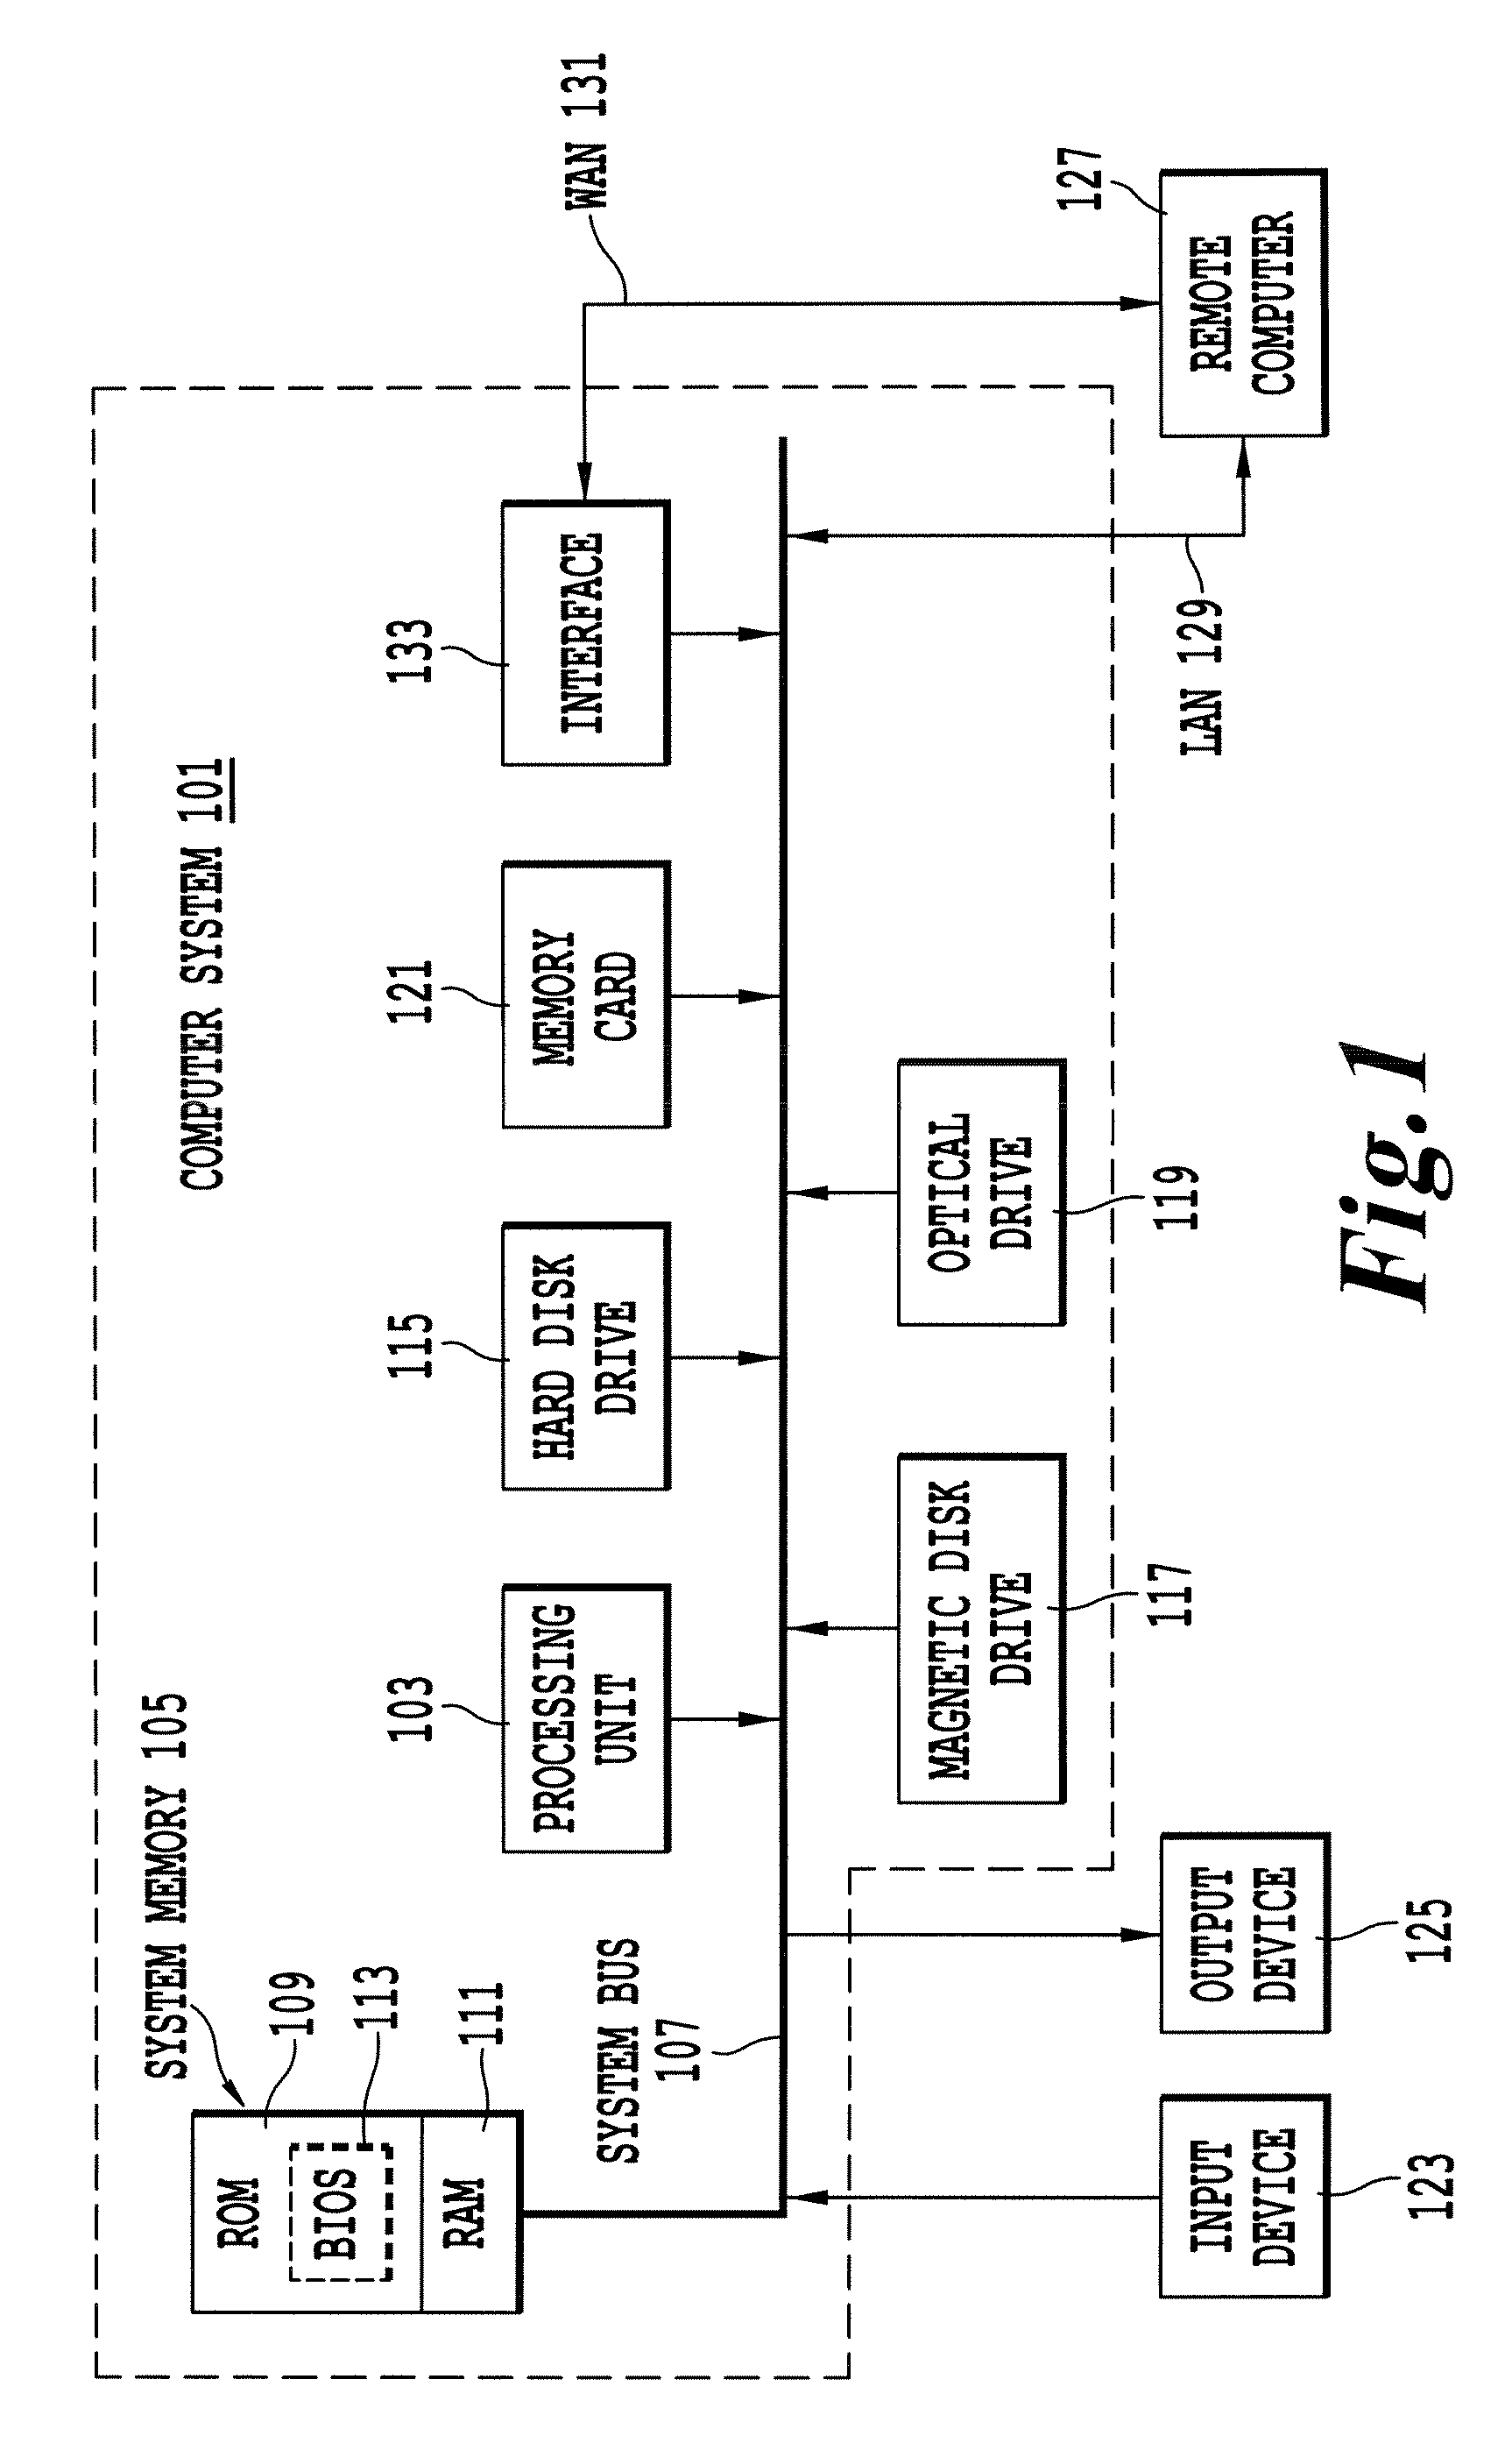 Method and system for determining information to access an electronic mail account